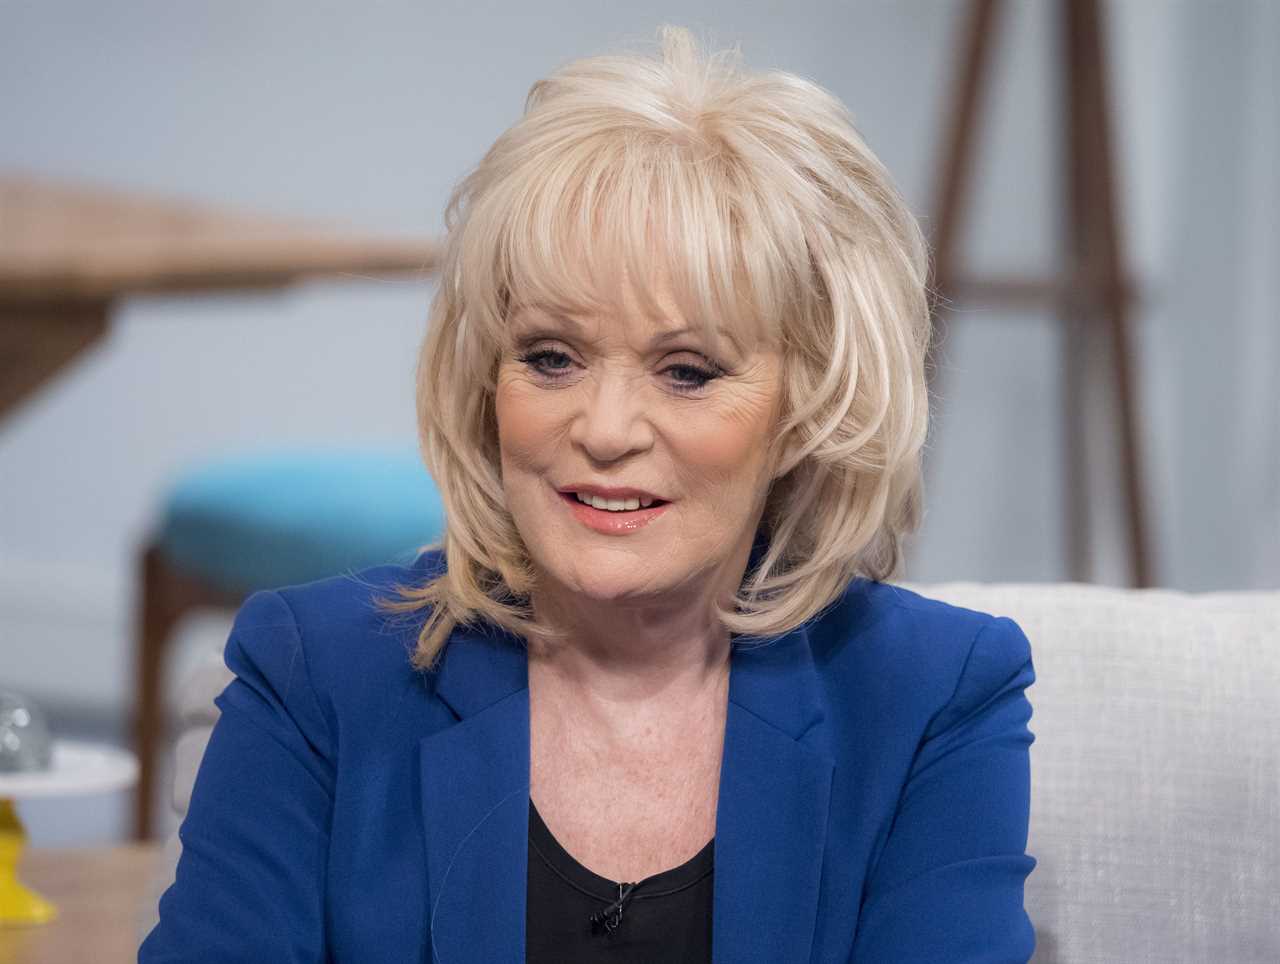 Sherrie Hewson, 68, reveals she’s having SECOND face lift and neck surgery as troubled star admits she’s desperate to look young again to win back Loose Women job